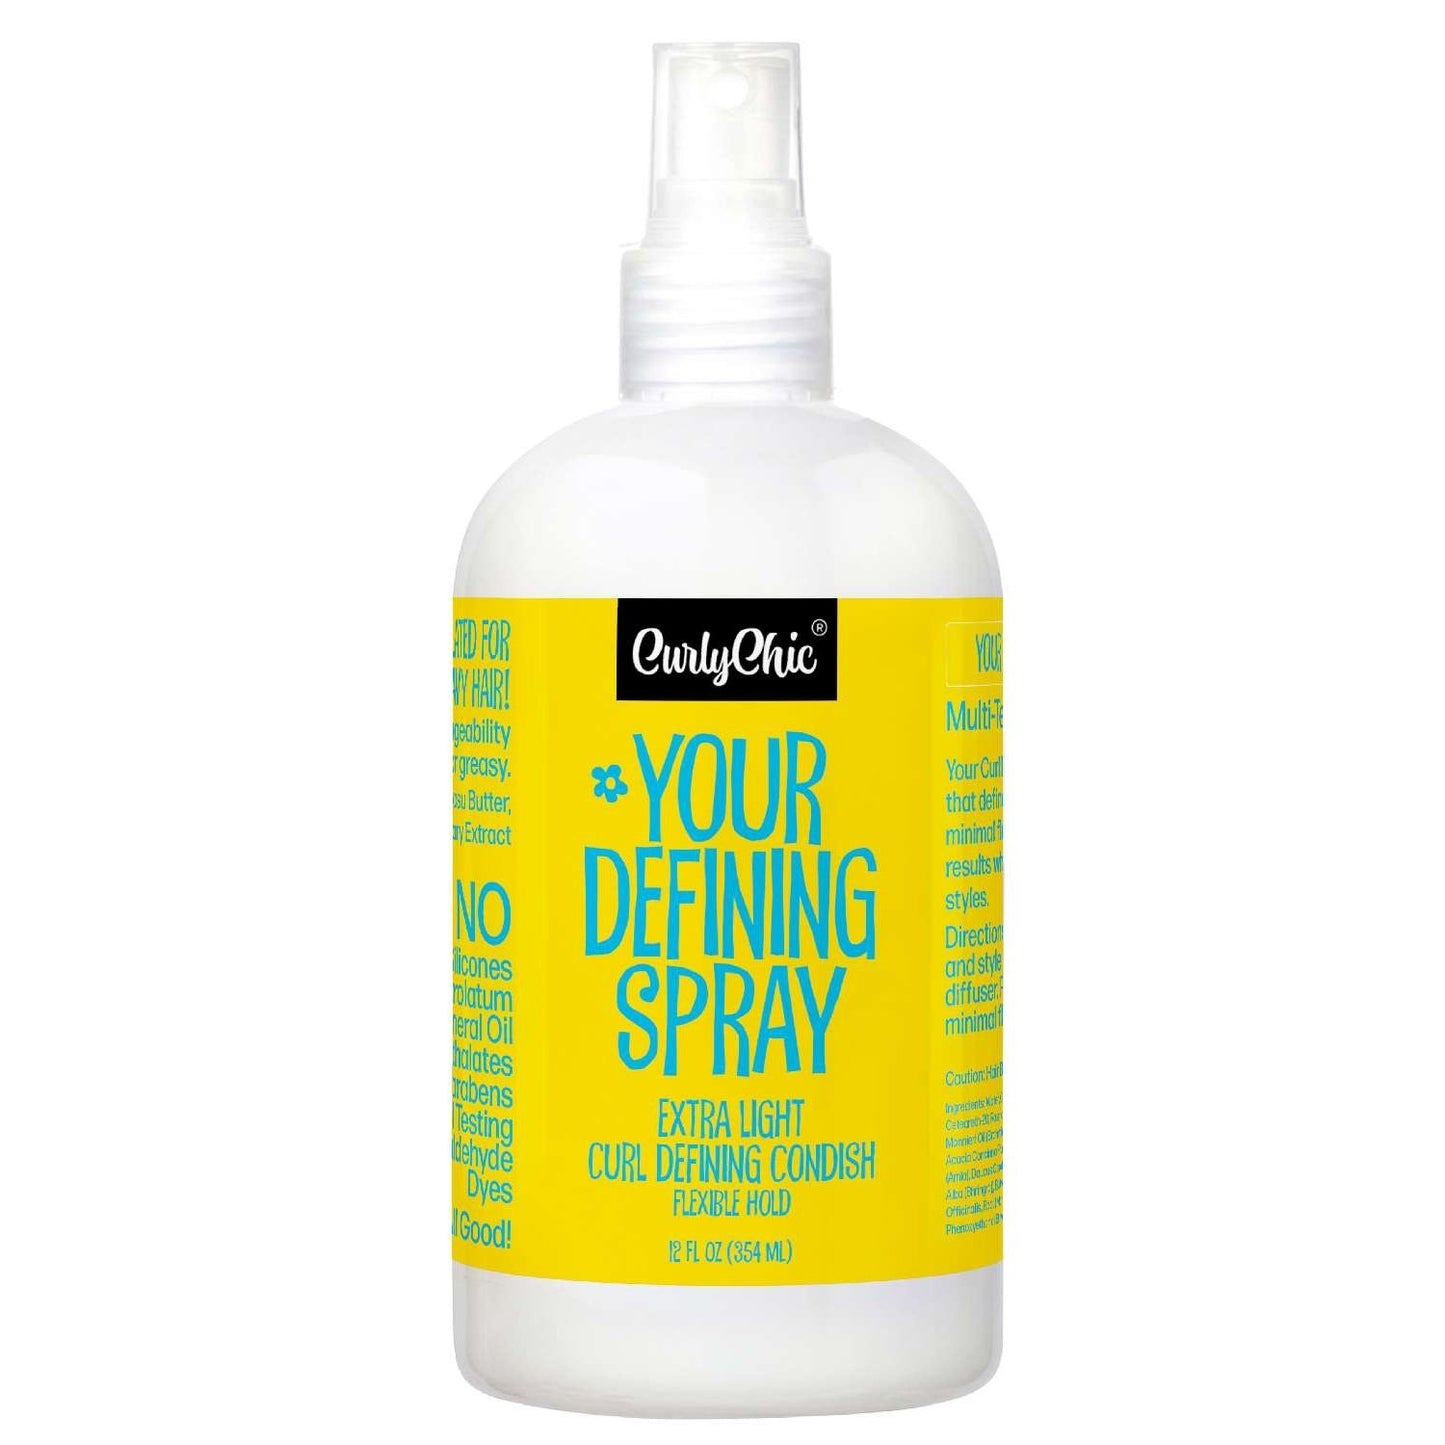 Curly Chic Your Defining Spray 12 Oz